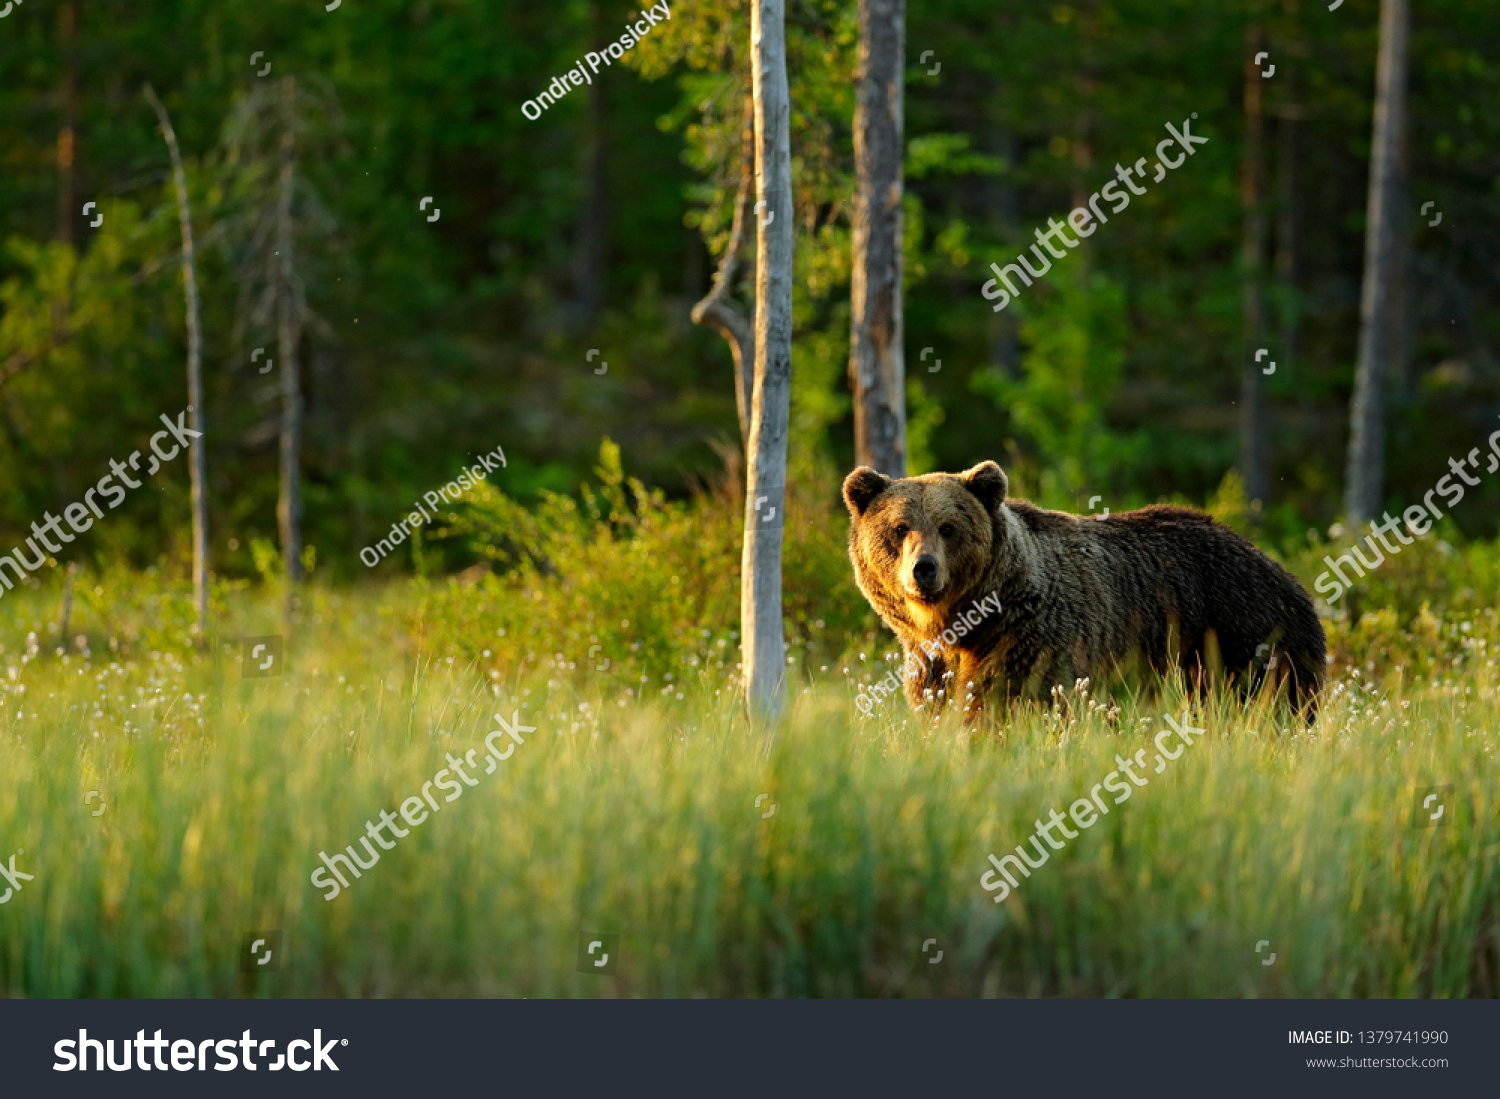 Sunset, morning light with big brown bear walking around lake in the morning light. Dangerous animal in nature forest and meadow habitat. Wildlife scene from Finland near Russian border. #1379741990